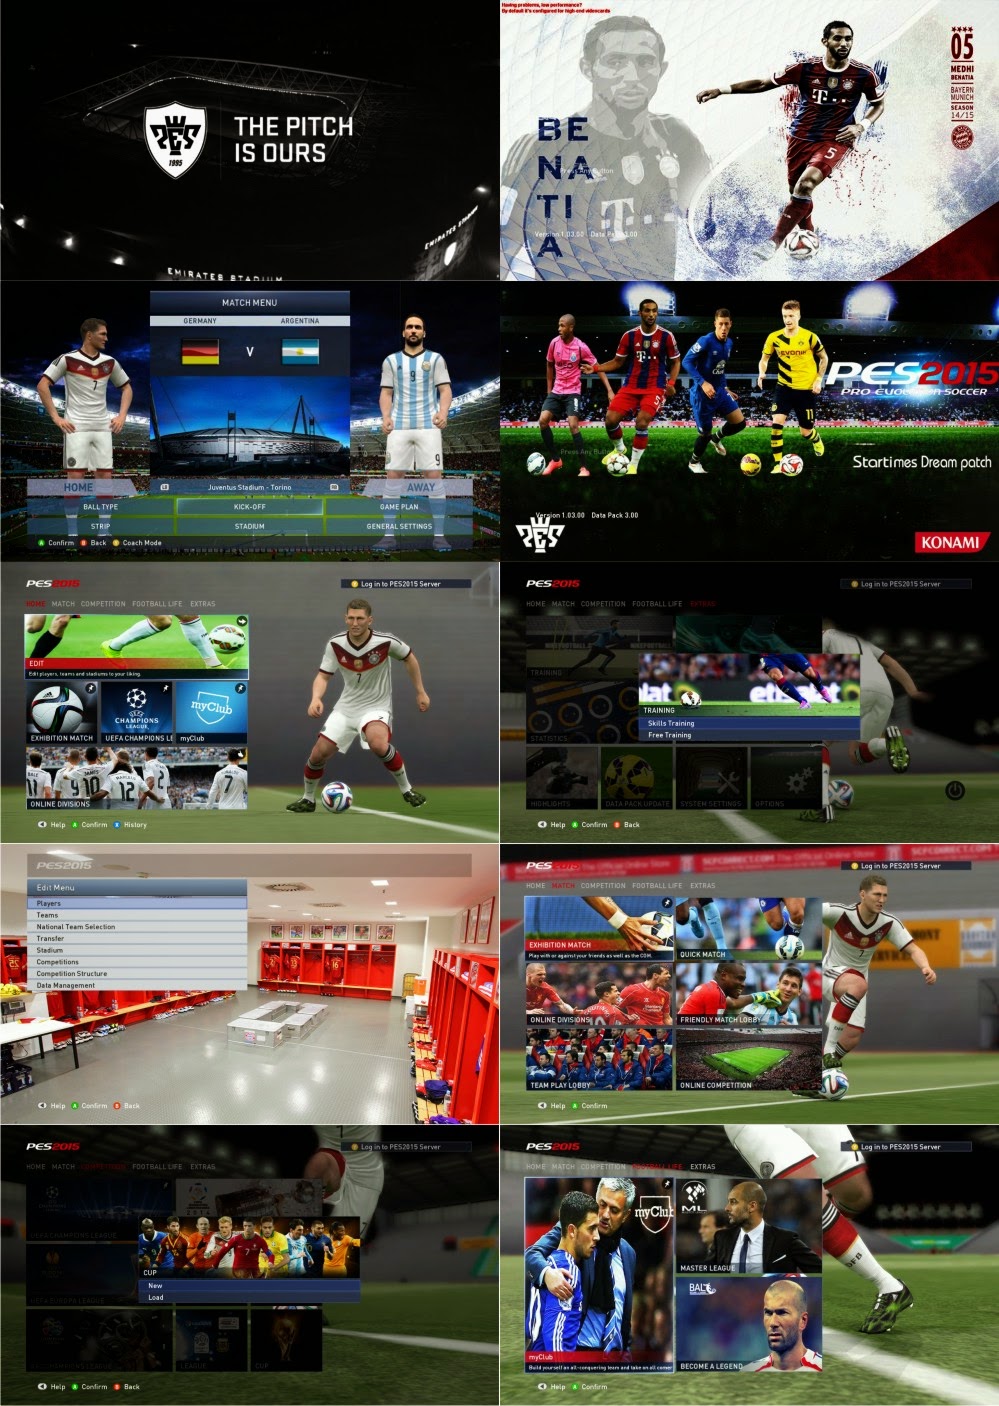 PES 2015 New Graphic by mossa the rock